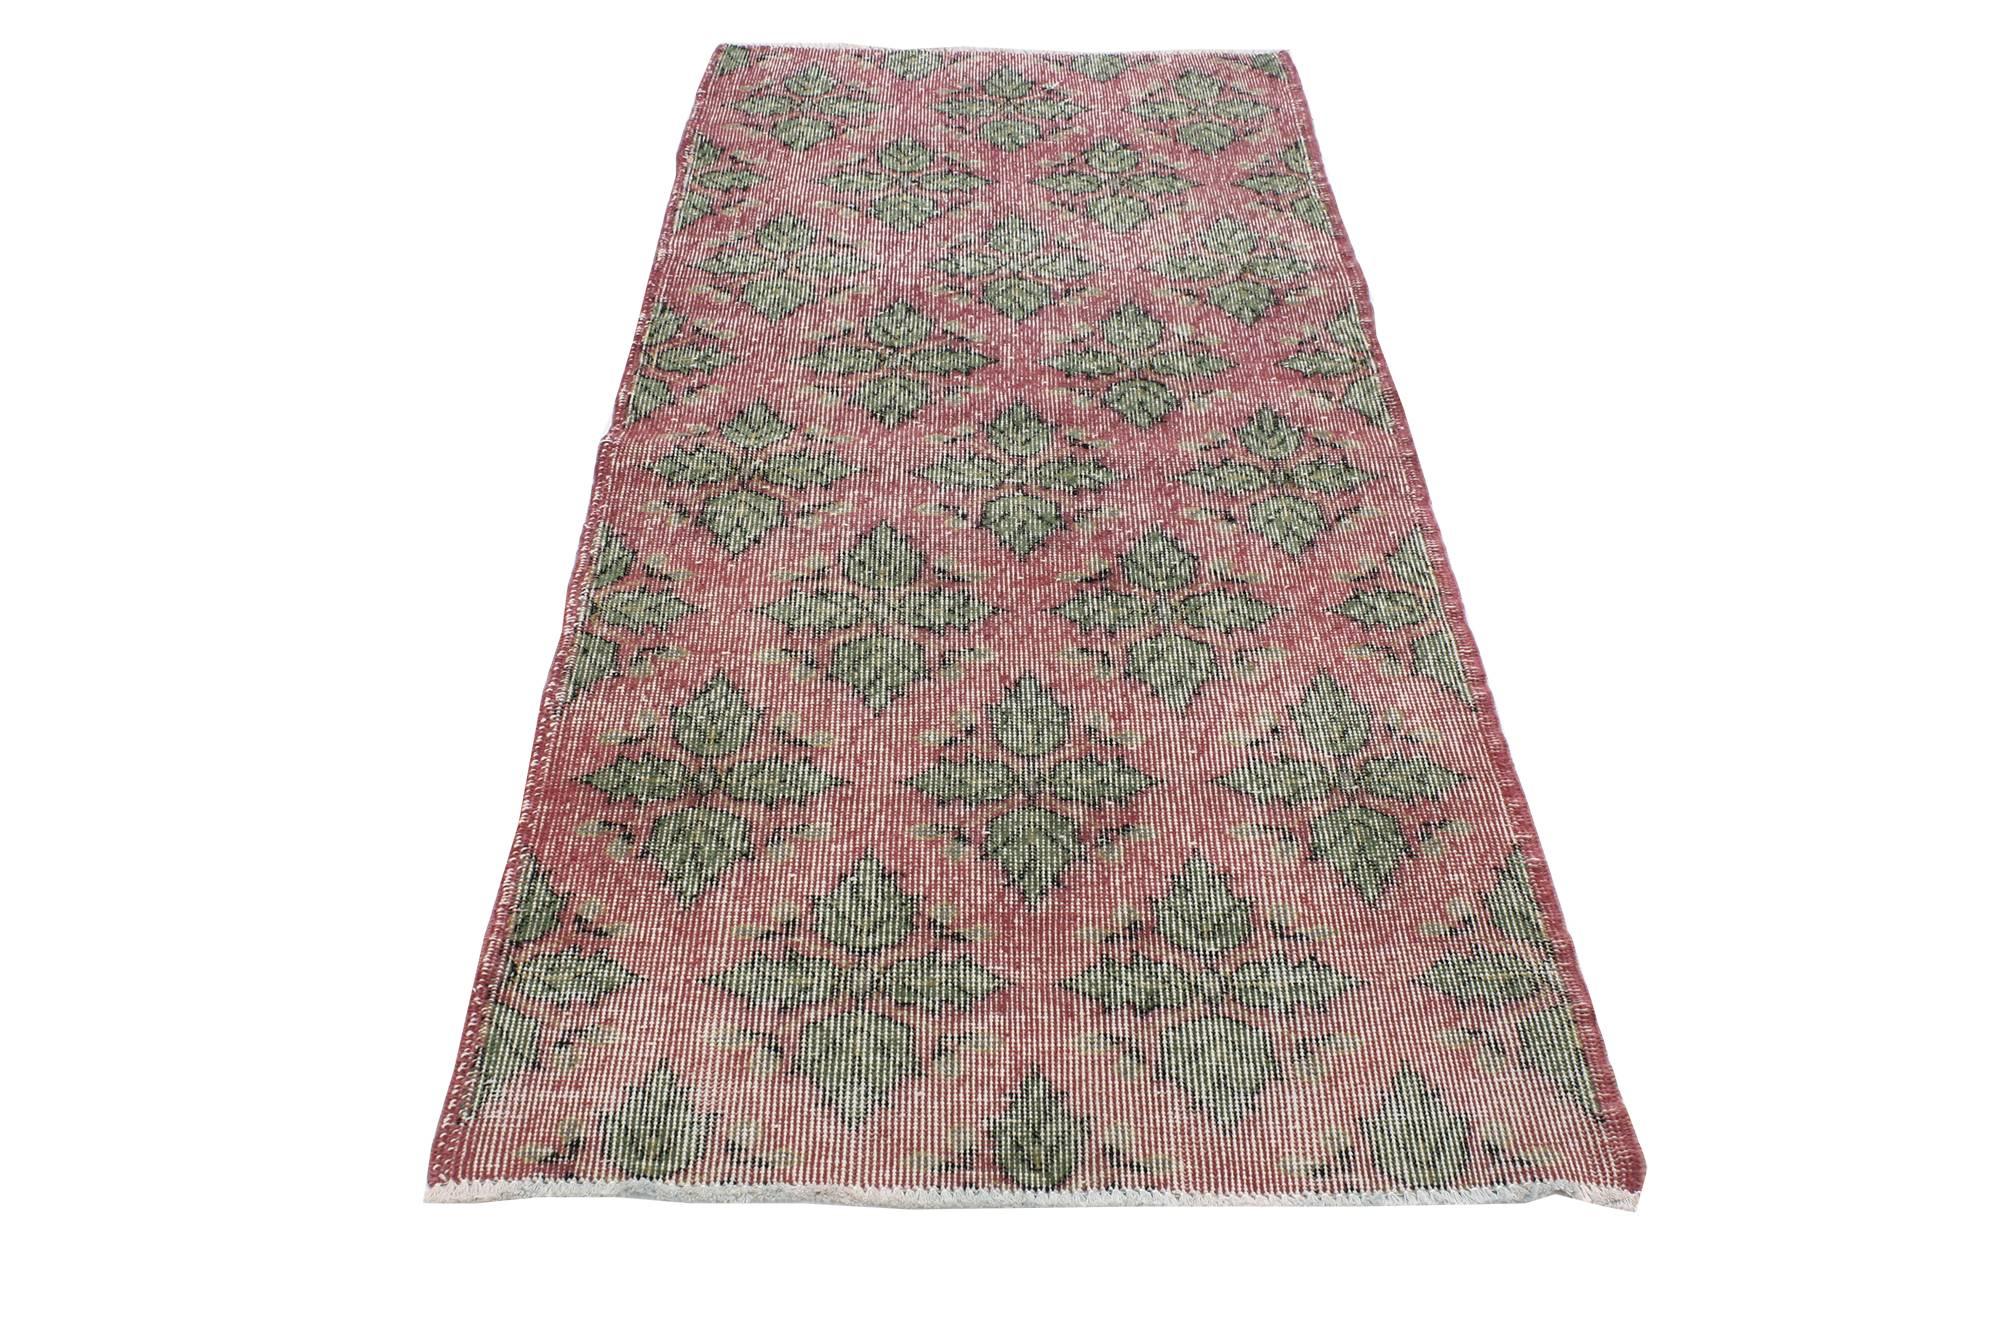 51918 Distressed Vintage Turkish Sivas Runner with Traditional English Tudor Cottage Style 02'10 x 06'02. Warm and inviting, this hand knotted wool distressed vintage Turkish Sivas runner awakens the soul with its understated elegance and